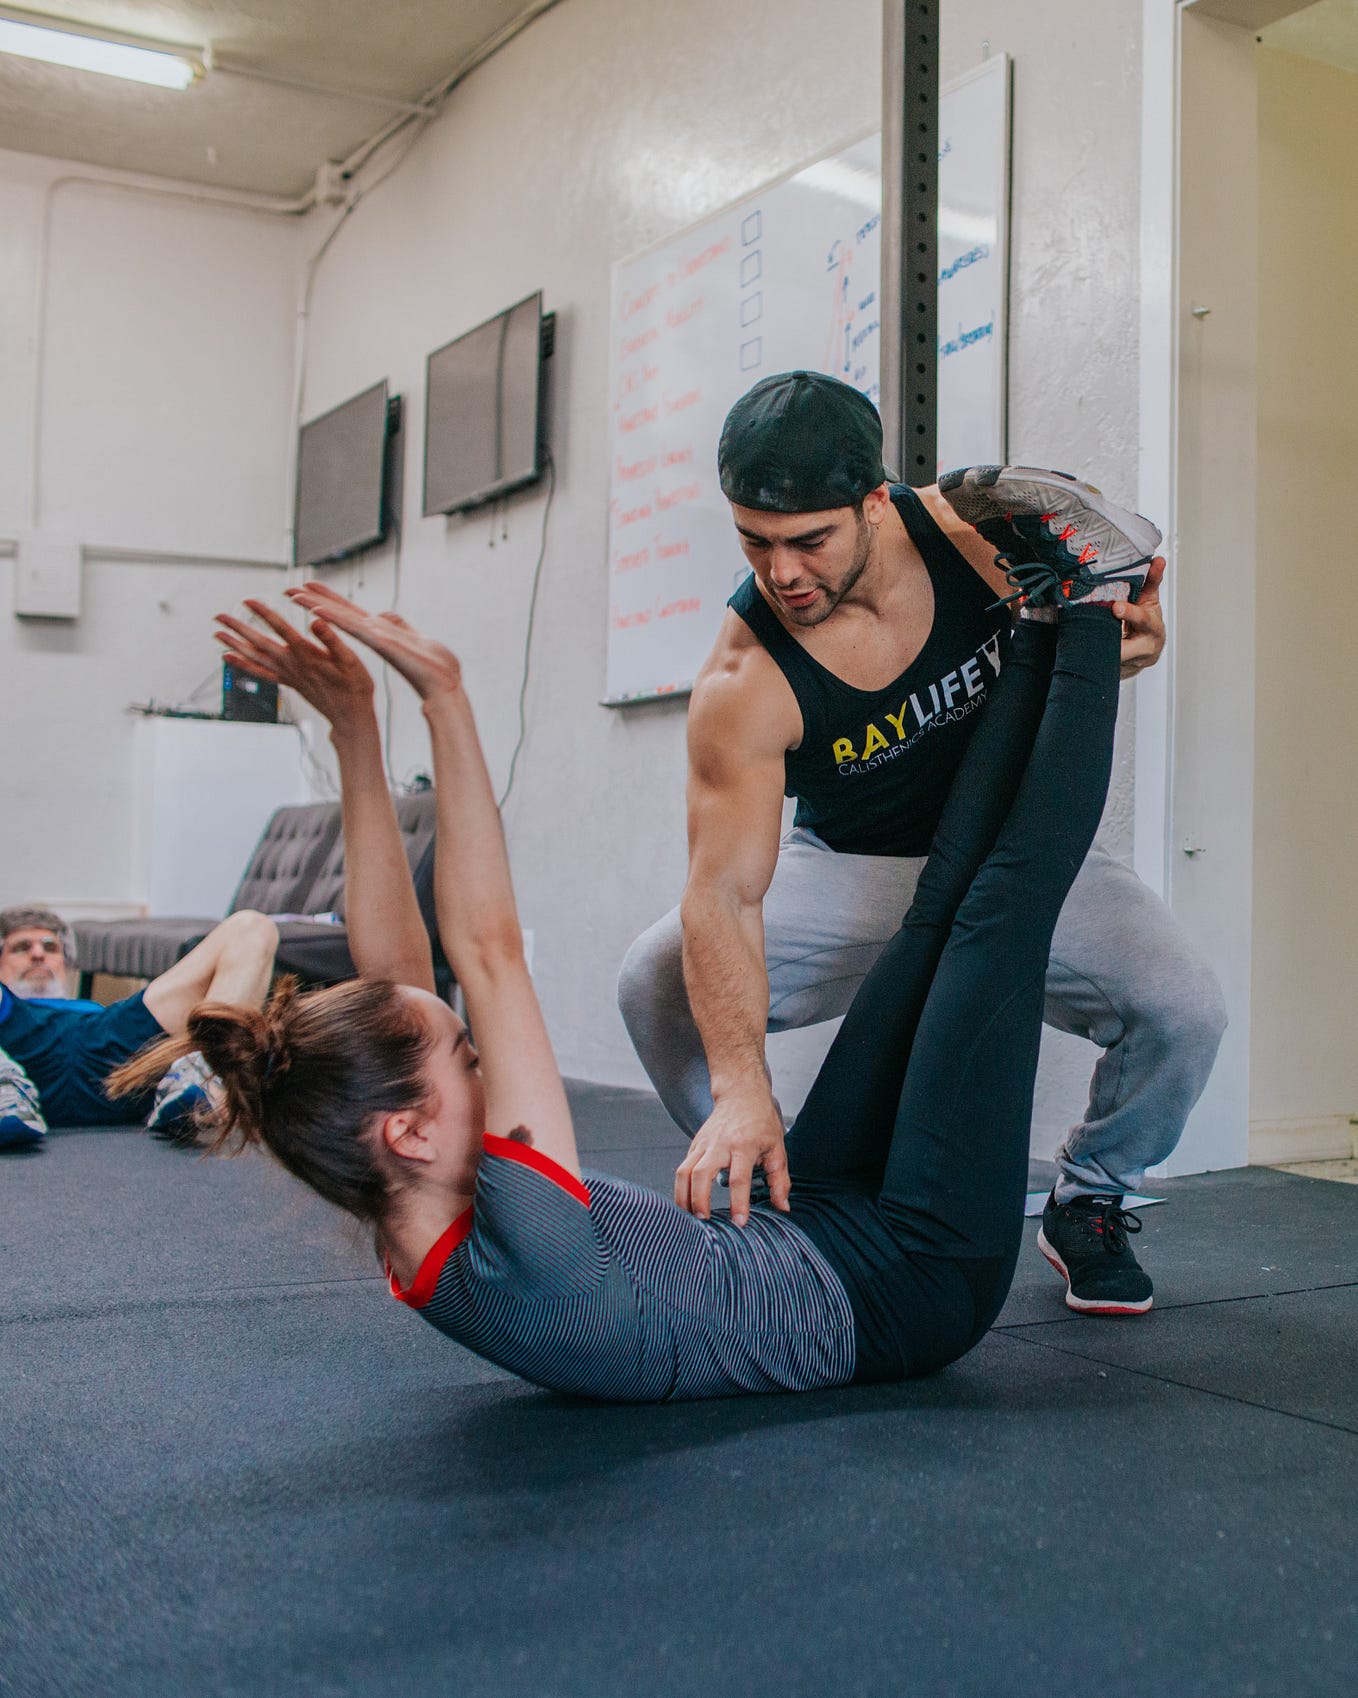 A male trainer at a gym helps a young woman stretch, an older man in the background looks on.